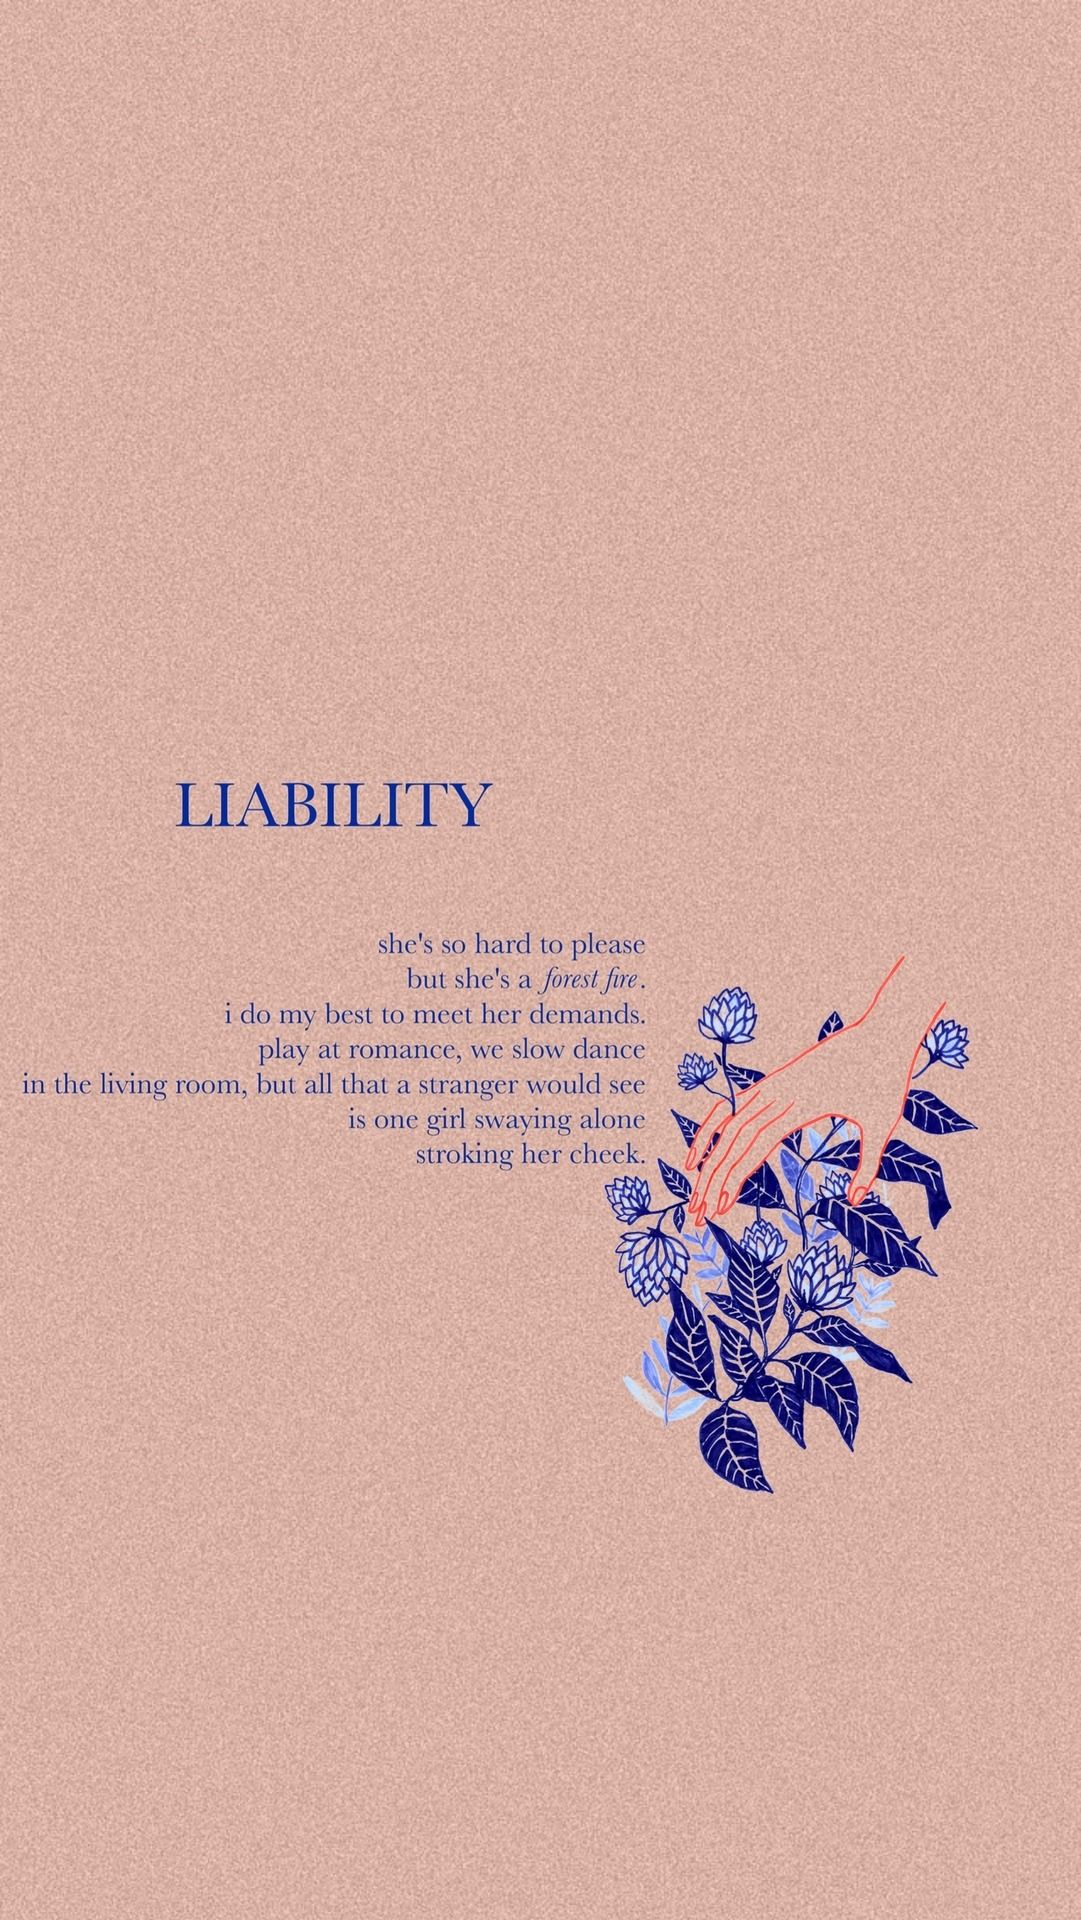 The cover of Liability by Sarah MacLean. - Dance